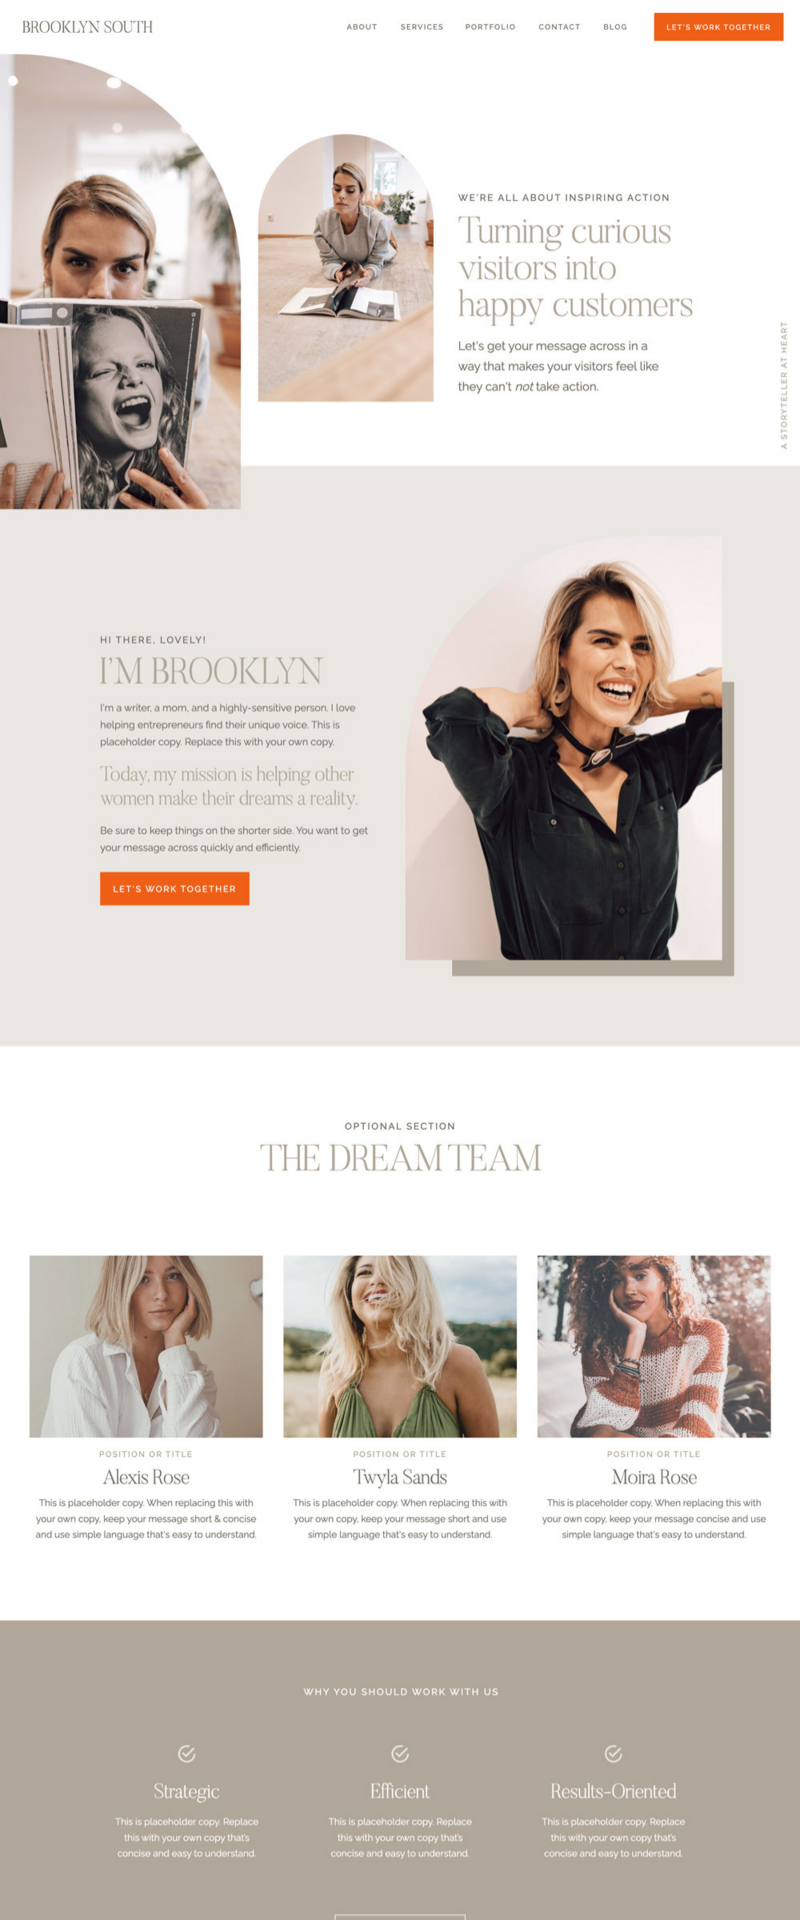 showit_template_for_creative_service_providers_-_brooklyn_south_2